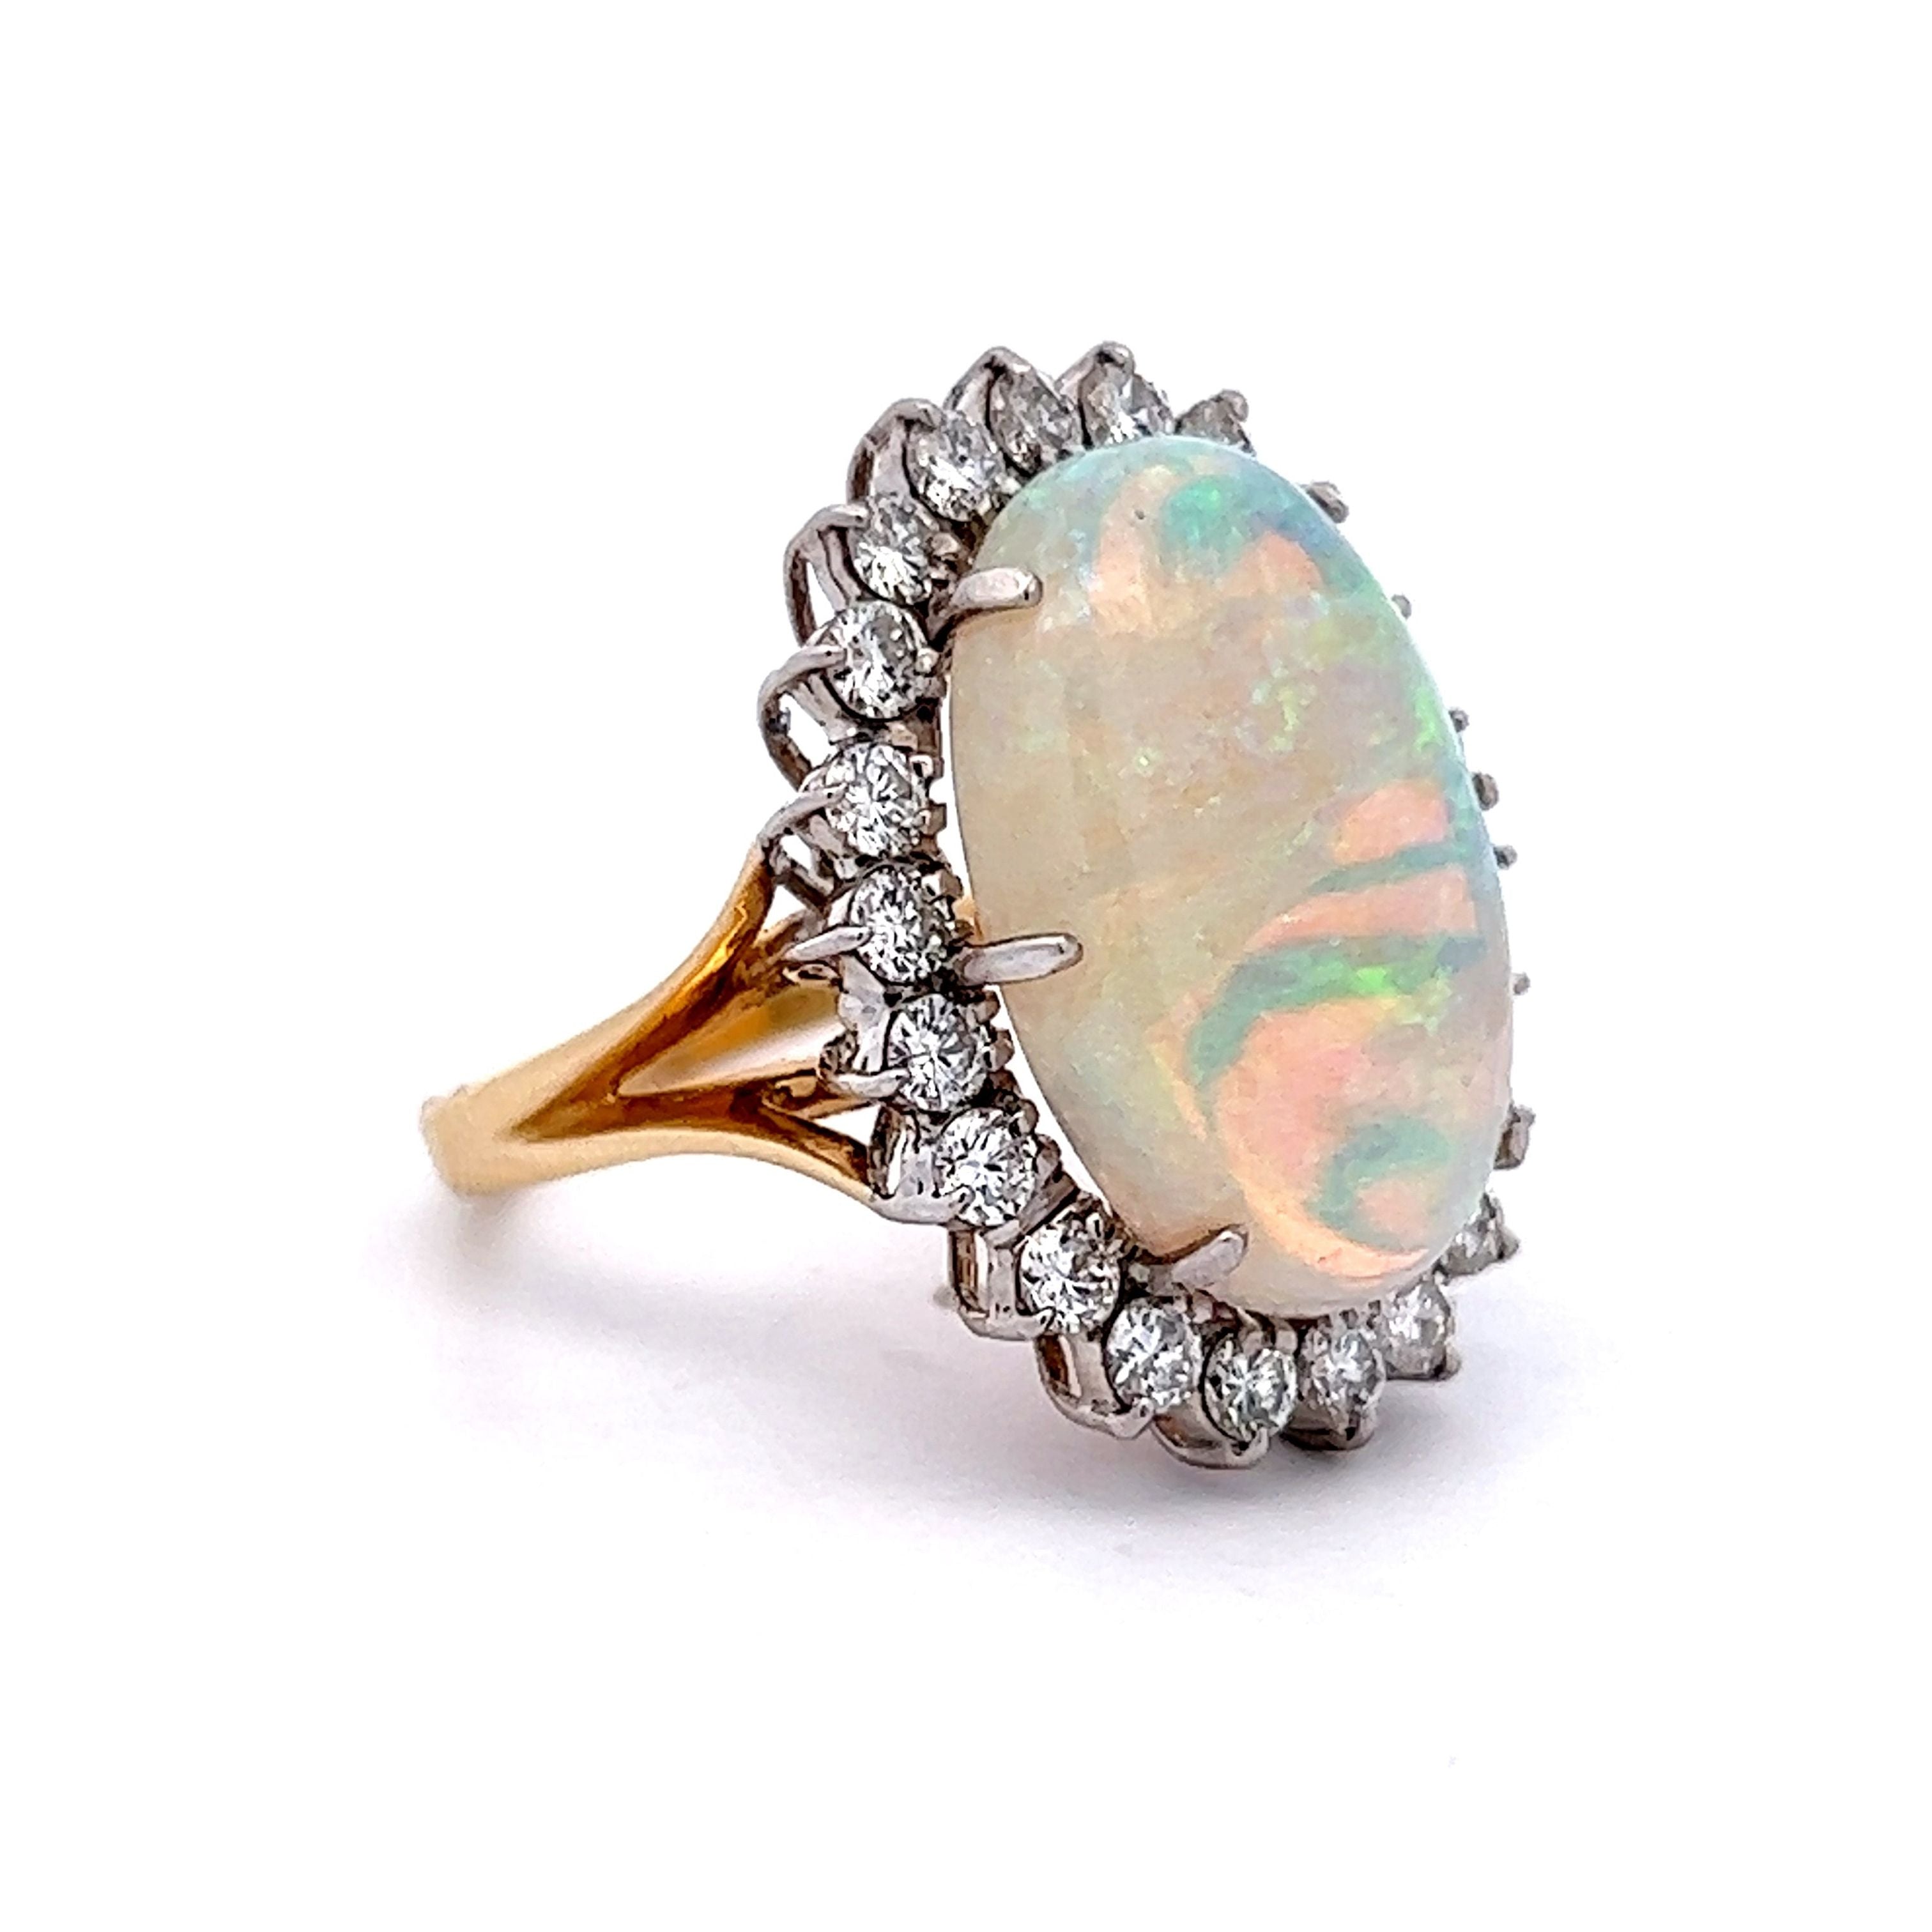 Vintage Opal and White Diamonds Ring crafted in 14k White Gold OPR-850